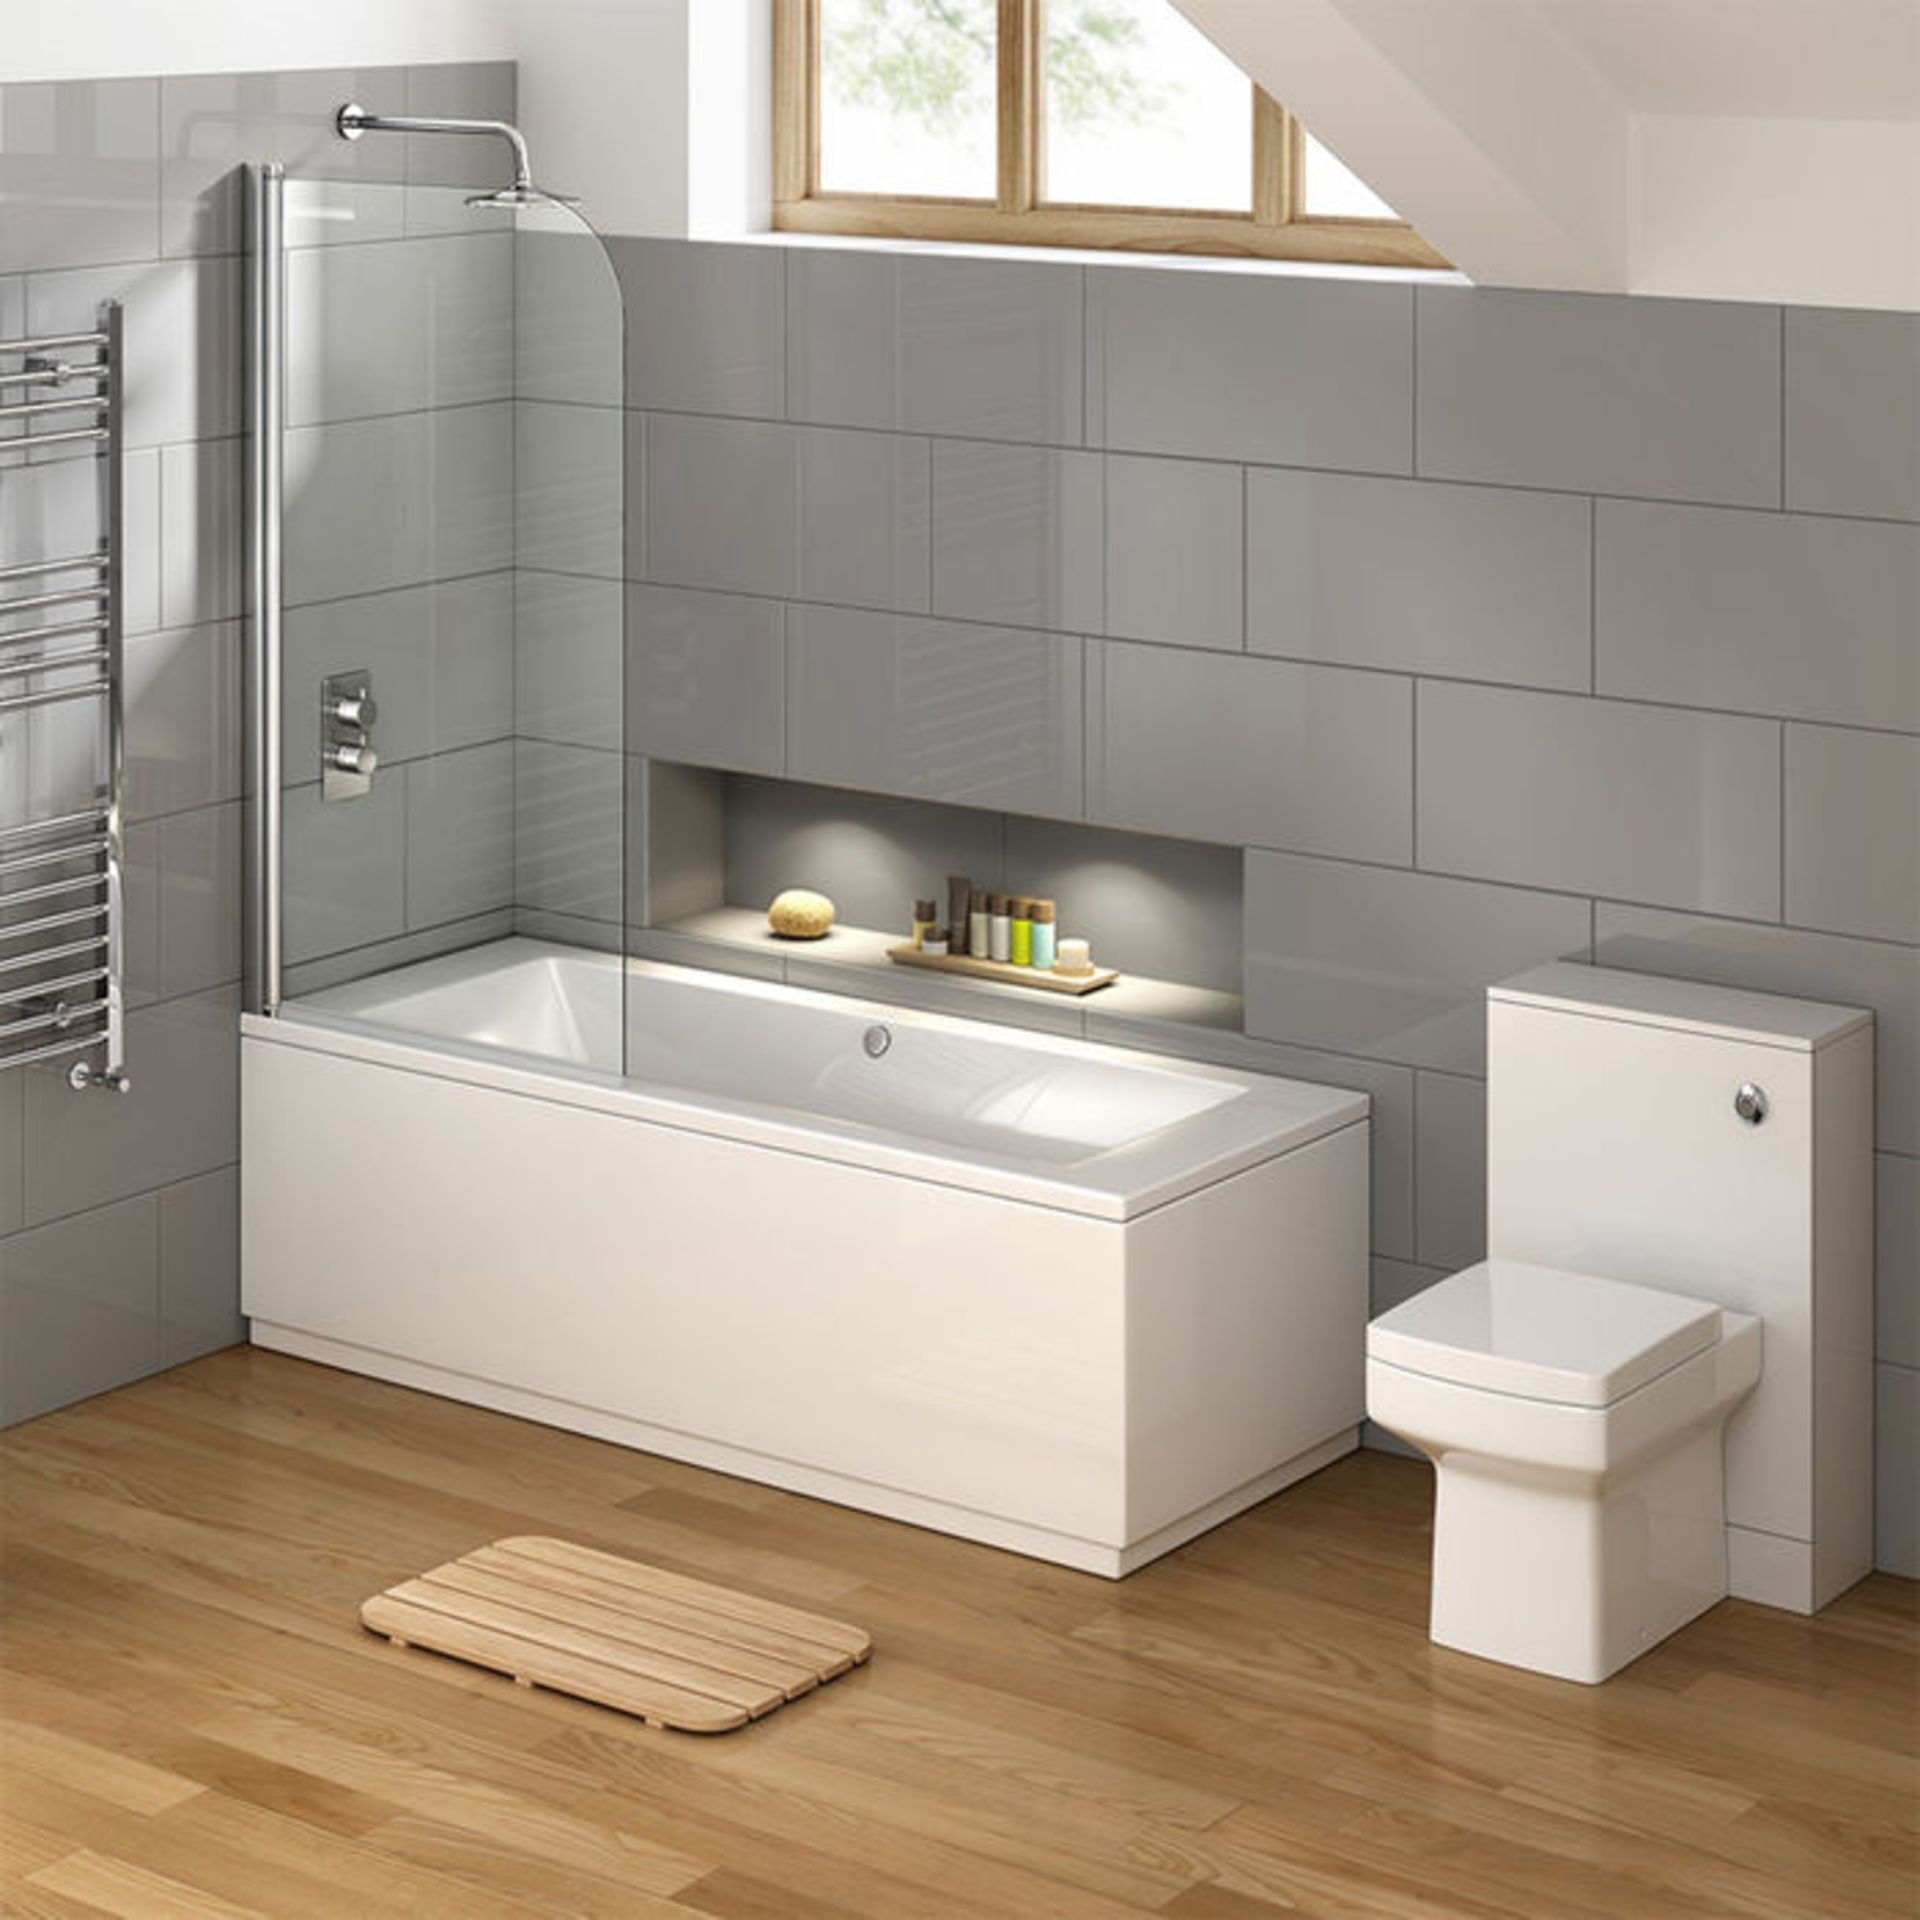 Twyfords 850mm - 8mm - EasyClean Right Hand Straight Bath Screen. 6mm Tempered Saftey Glass Scr... - Image 2 of 3